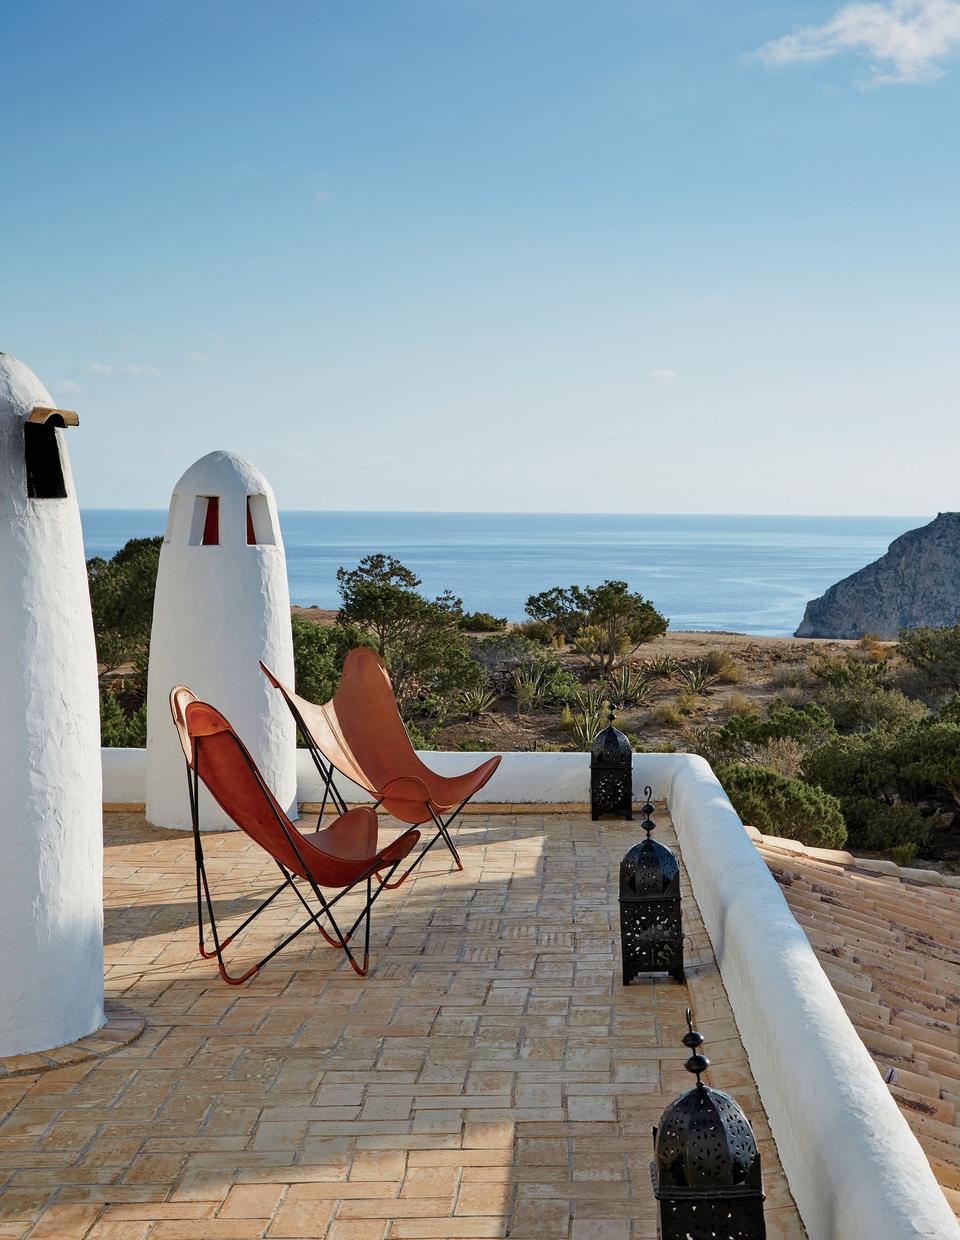 New York City–based architect and designer Daniel Romualdez relaxes at his Ibiza home when he’s not working on projects for his stylish client list, which includes Tory Burch and Aerin Lauder.